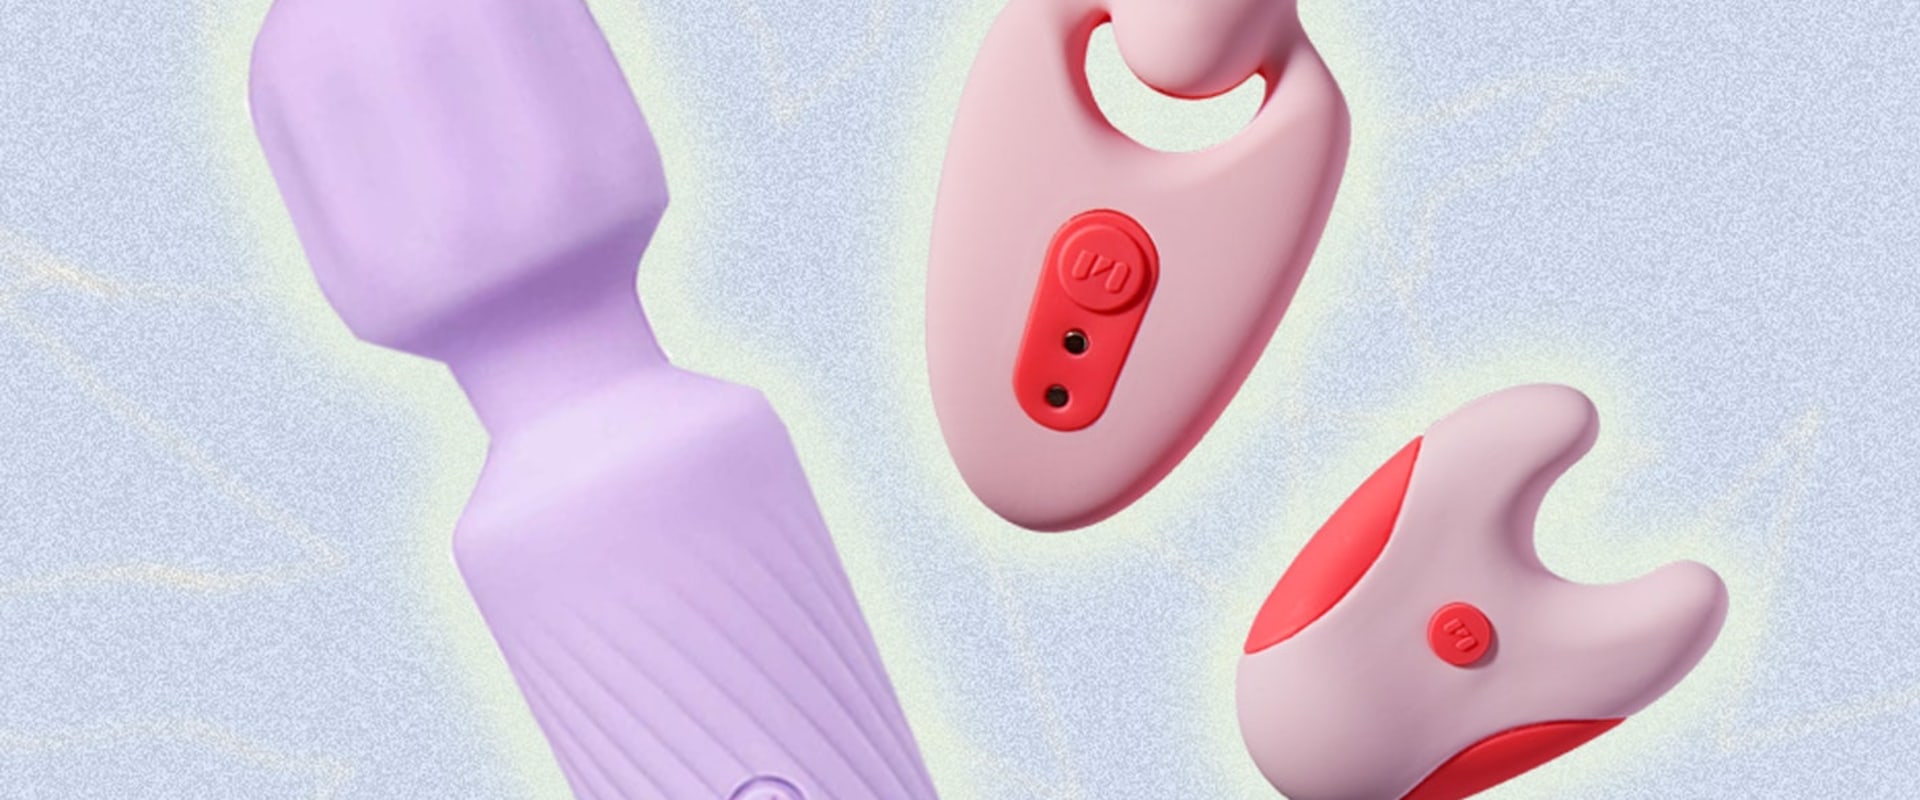 Everything You Need to Know About Using Waterproof Adult Toys